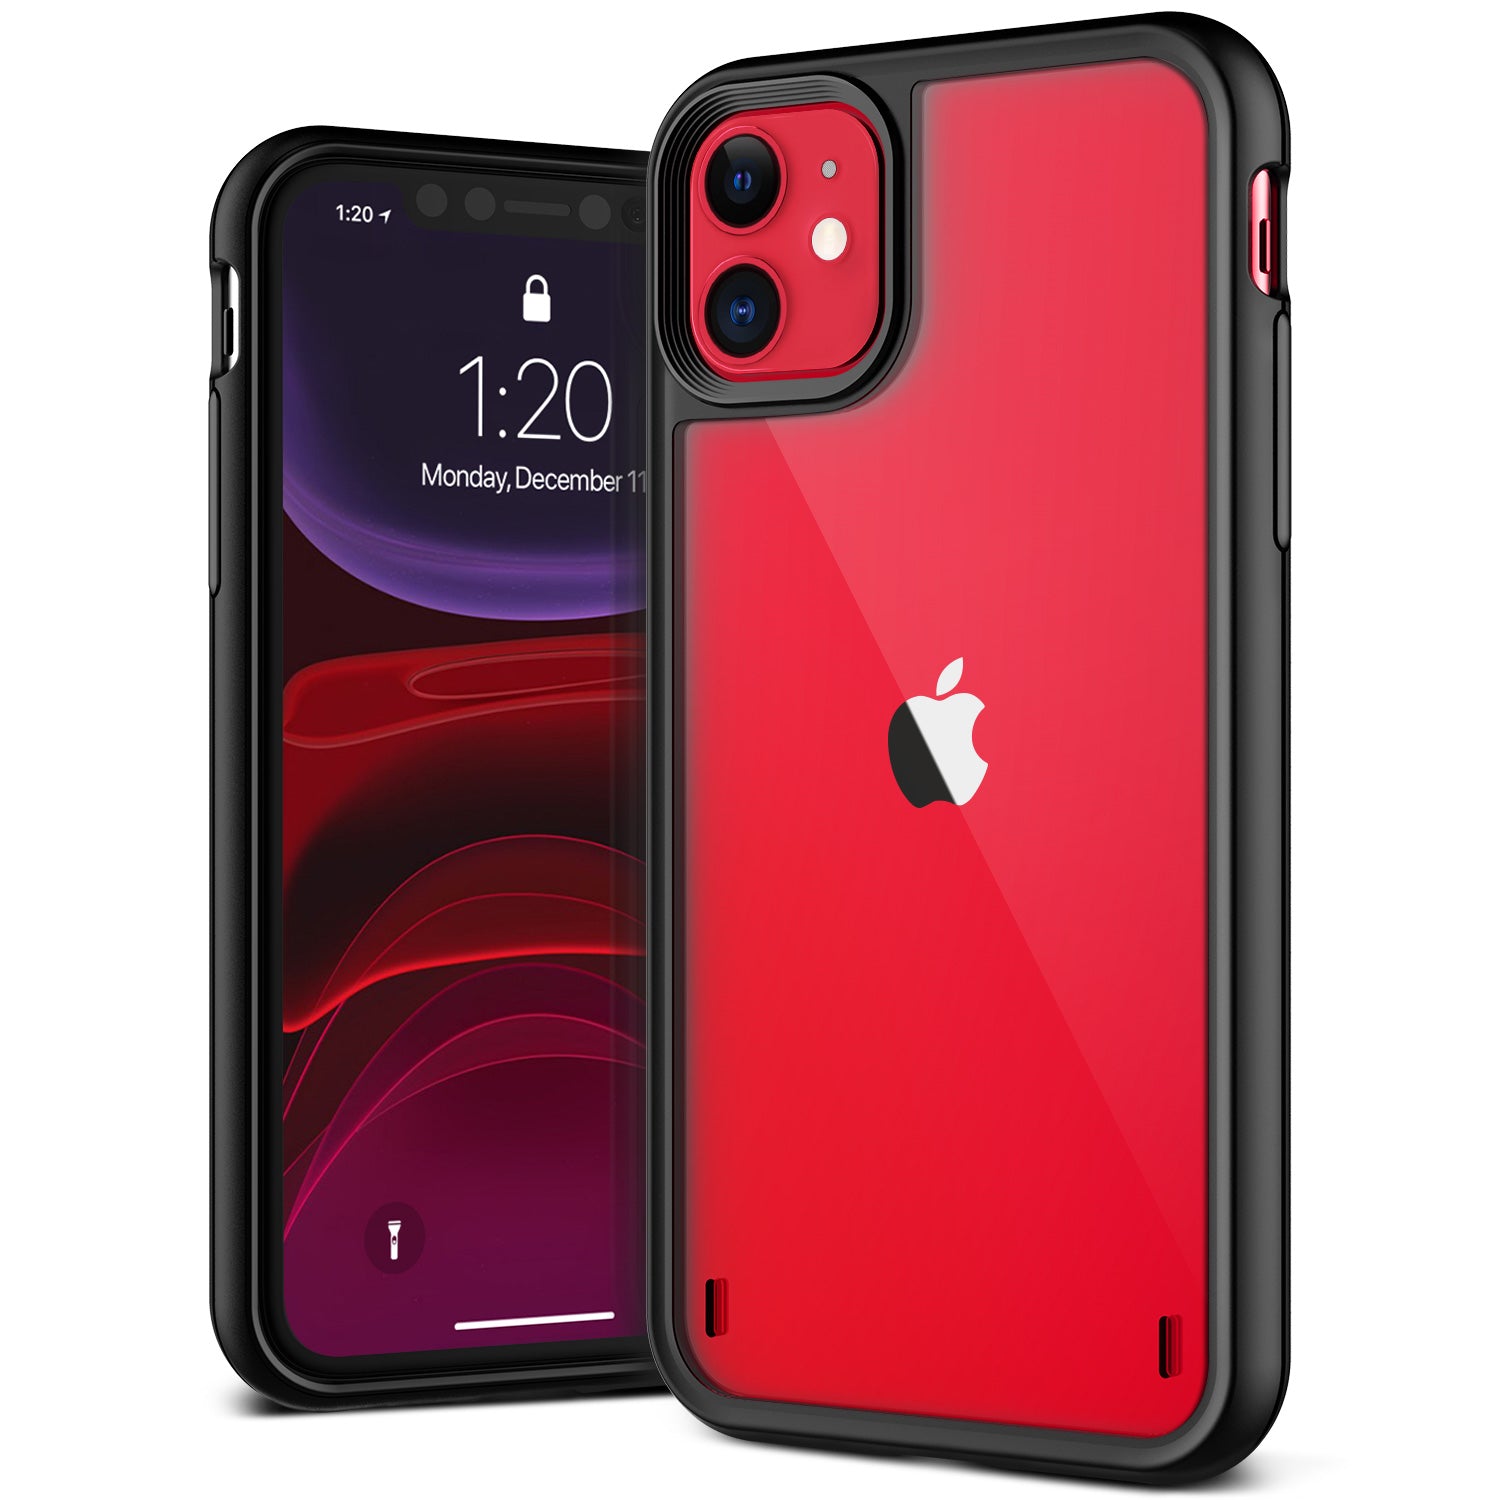 RhinoShield SolidSuit Case for iPhone 11 Pro Max SSA0114957 B&H